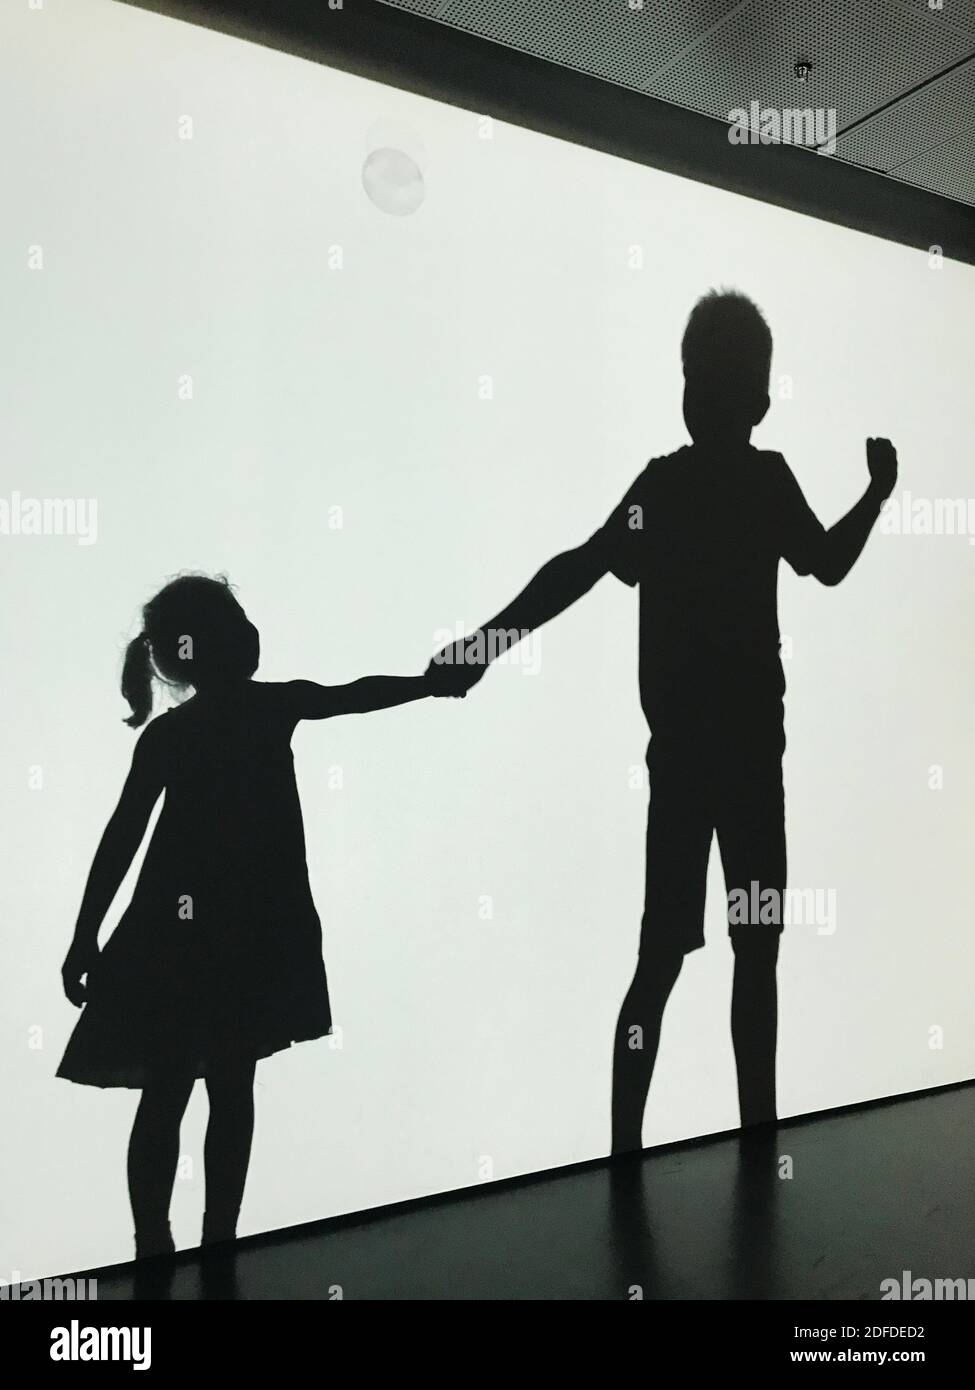 Friendship concept, silhouettes of a boy and a girl holding hands Stock Photo